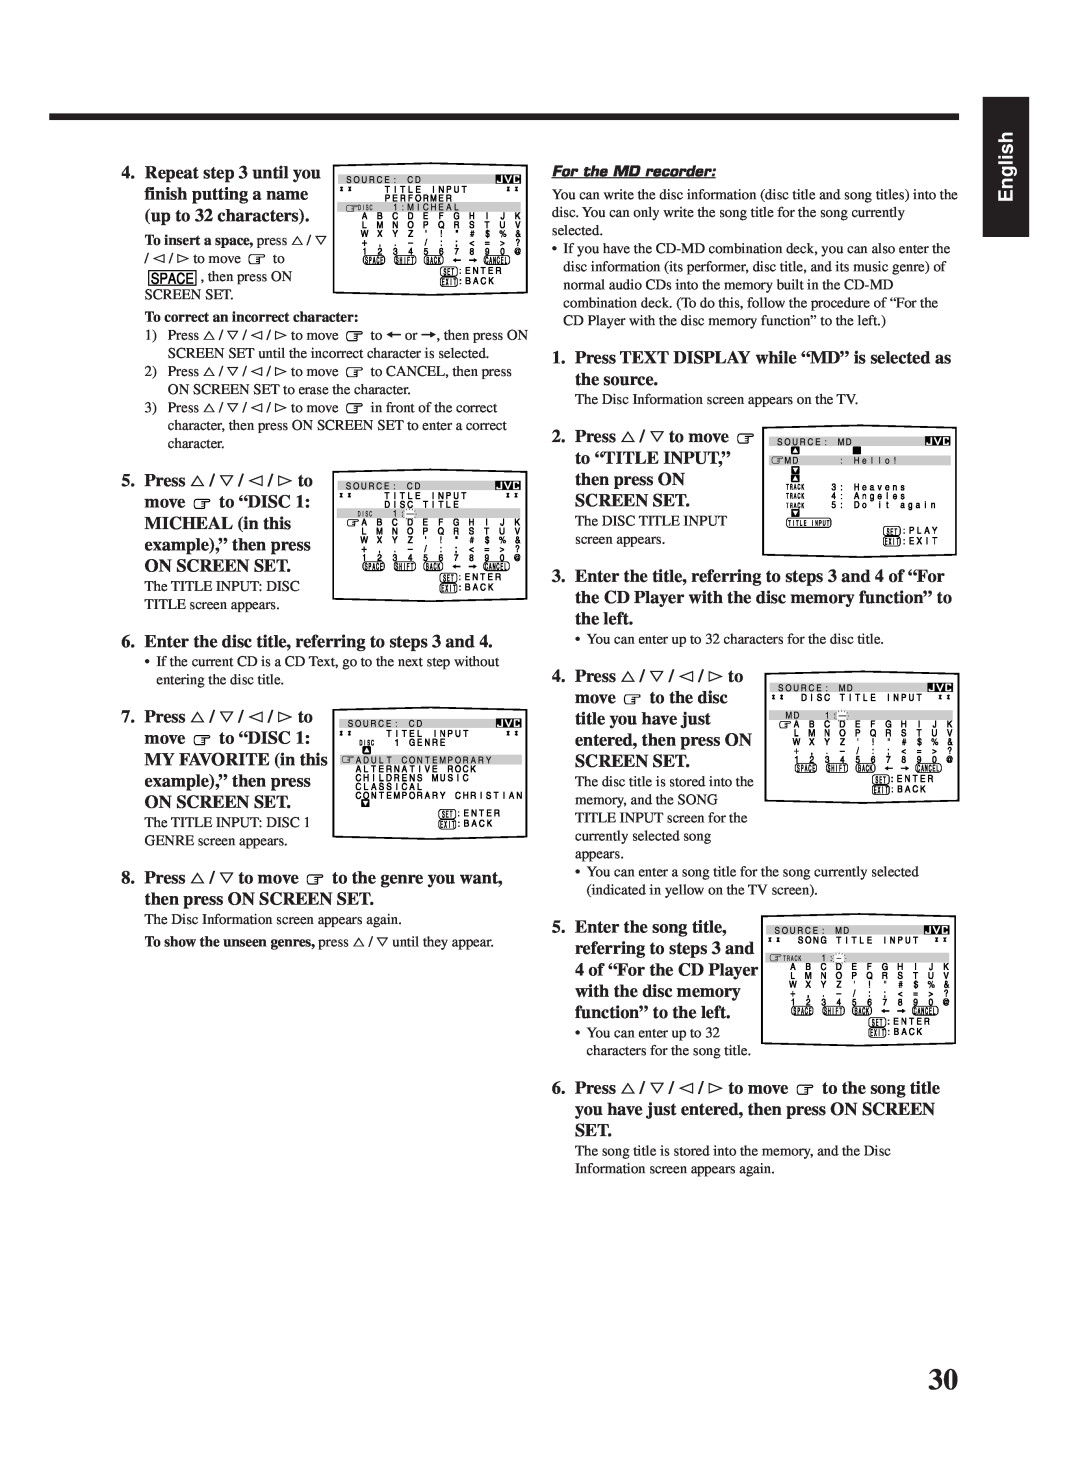 JVC LVT0142-006A, RX-669PGD manual English, up to 32 characters 